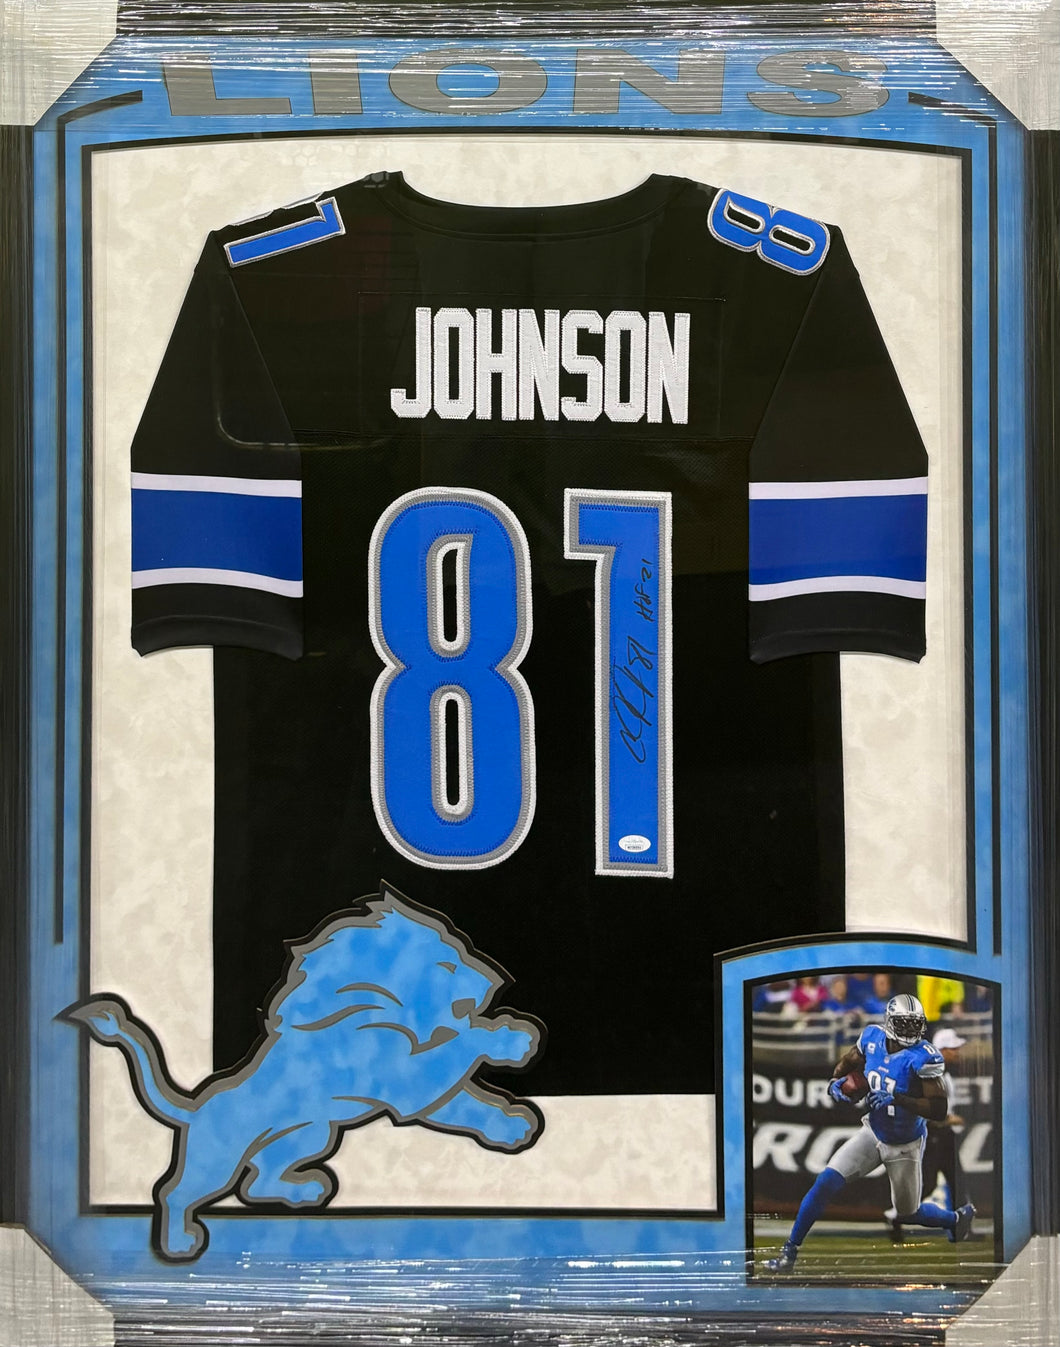 Detroit Lions Calvin Johnson Signed Black Jersey with HOF 21 Inscription Framed & Suede Matted with XL 3D Logo & Team Name Cutout JSA COA